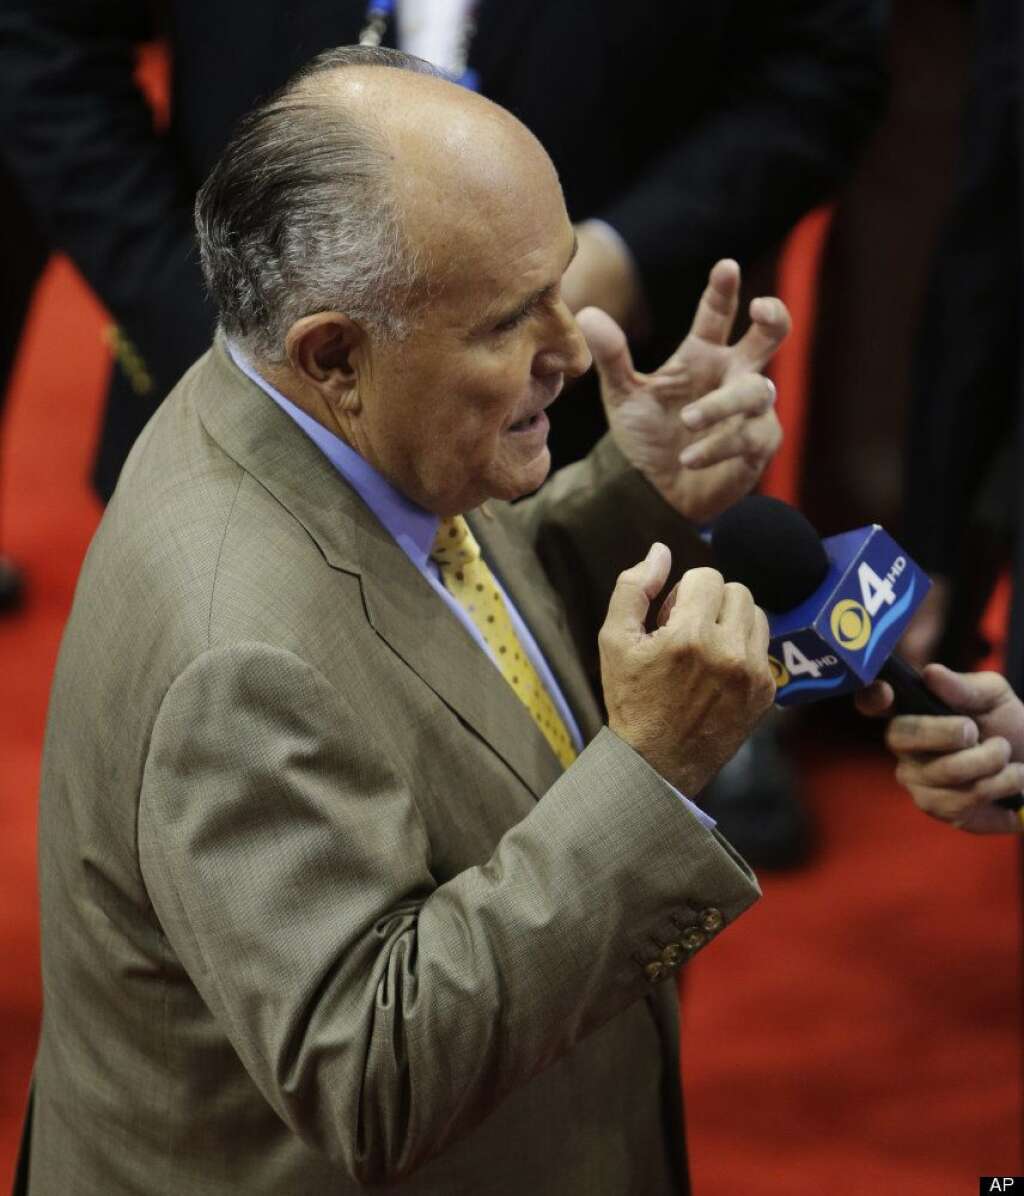 Former New York mayor Rudy Giuliani is interviewed on the convention floor before the Republican National Convention in Tampa, Fla., on Wednesday, Aug. 29, 2012. (AP Photo/Lynne Sladky)